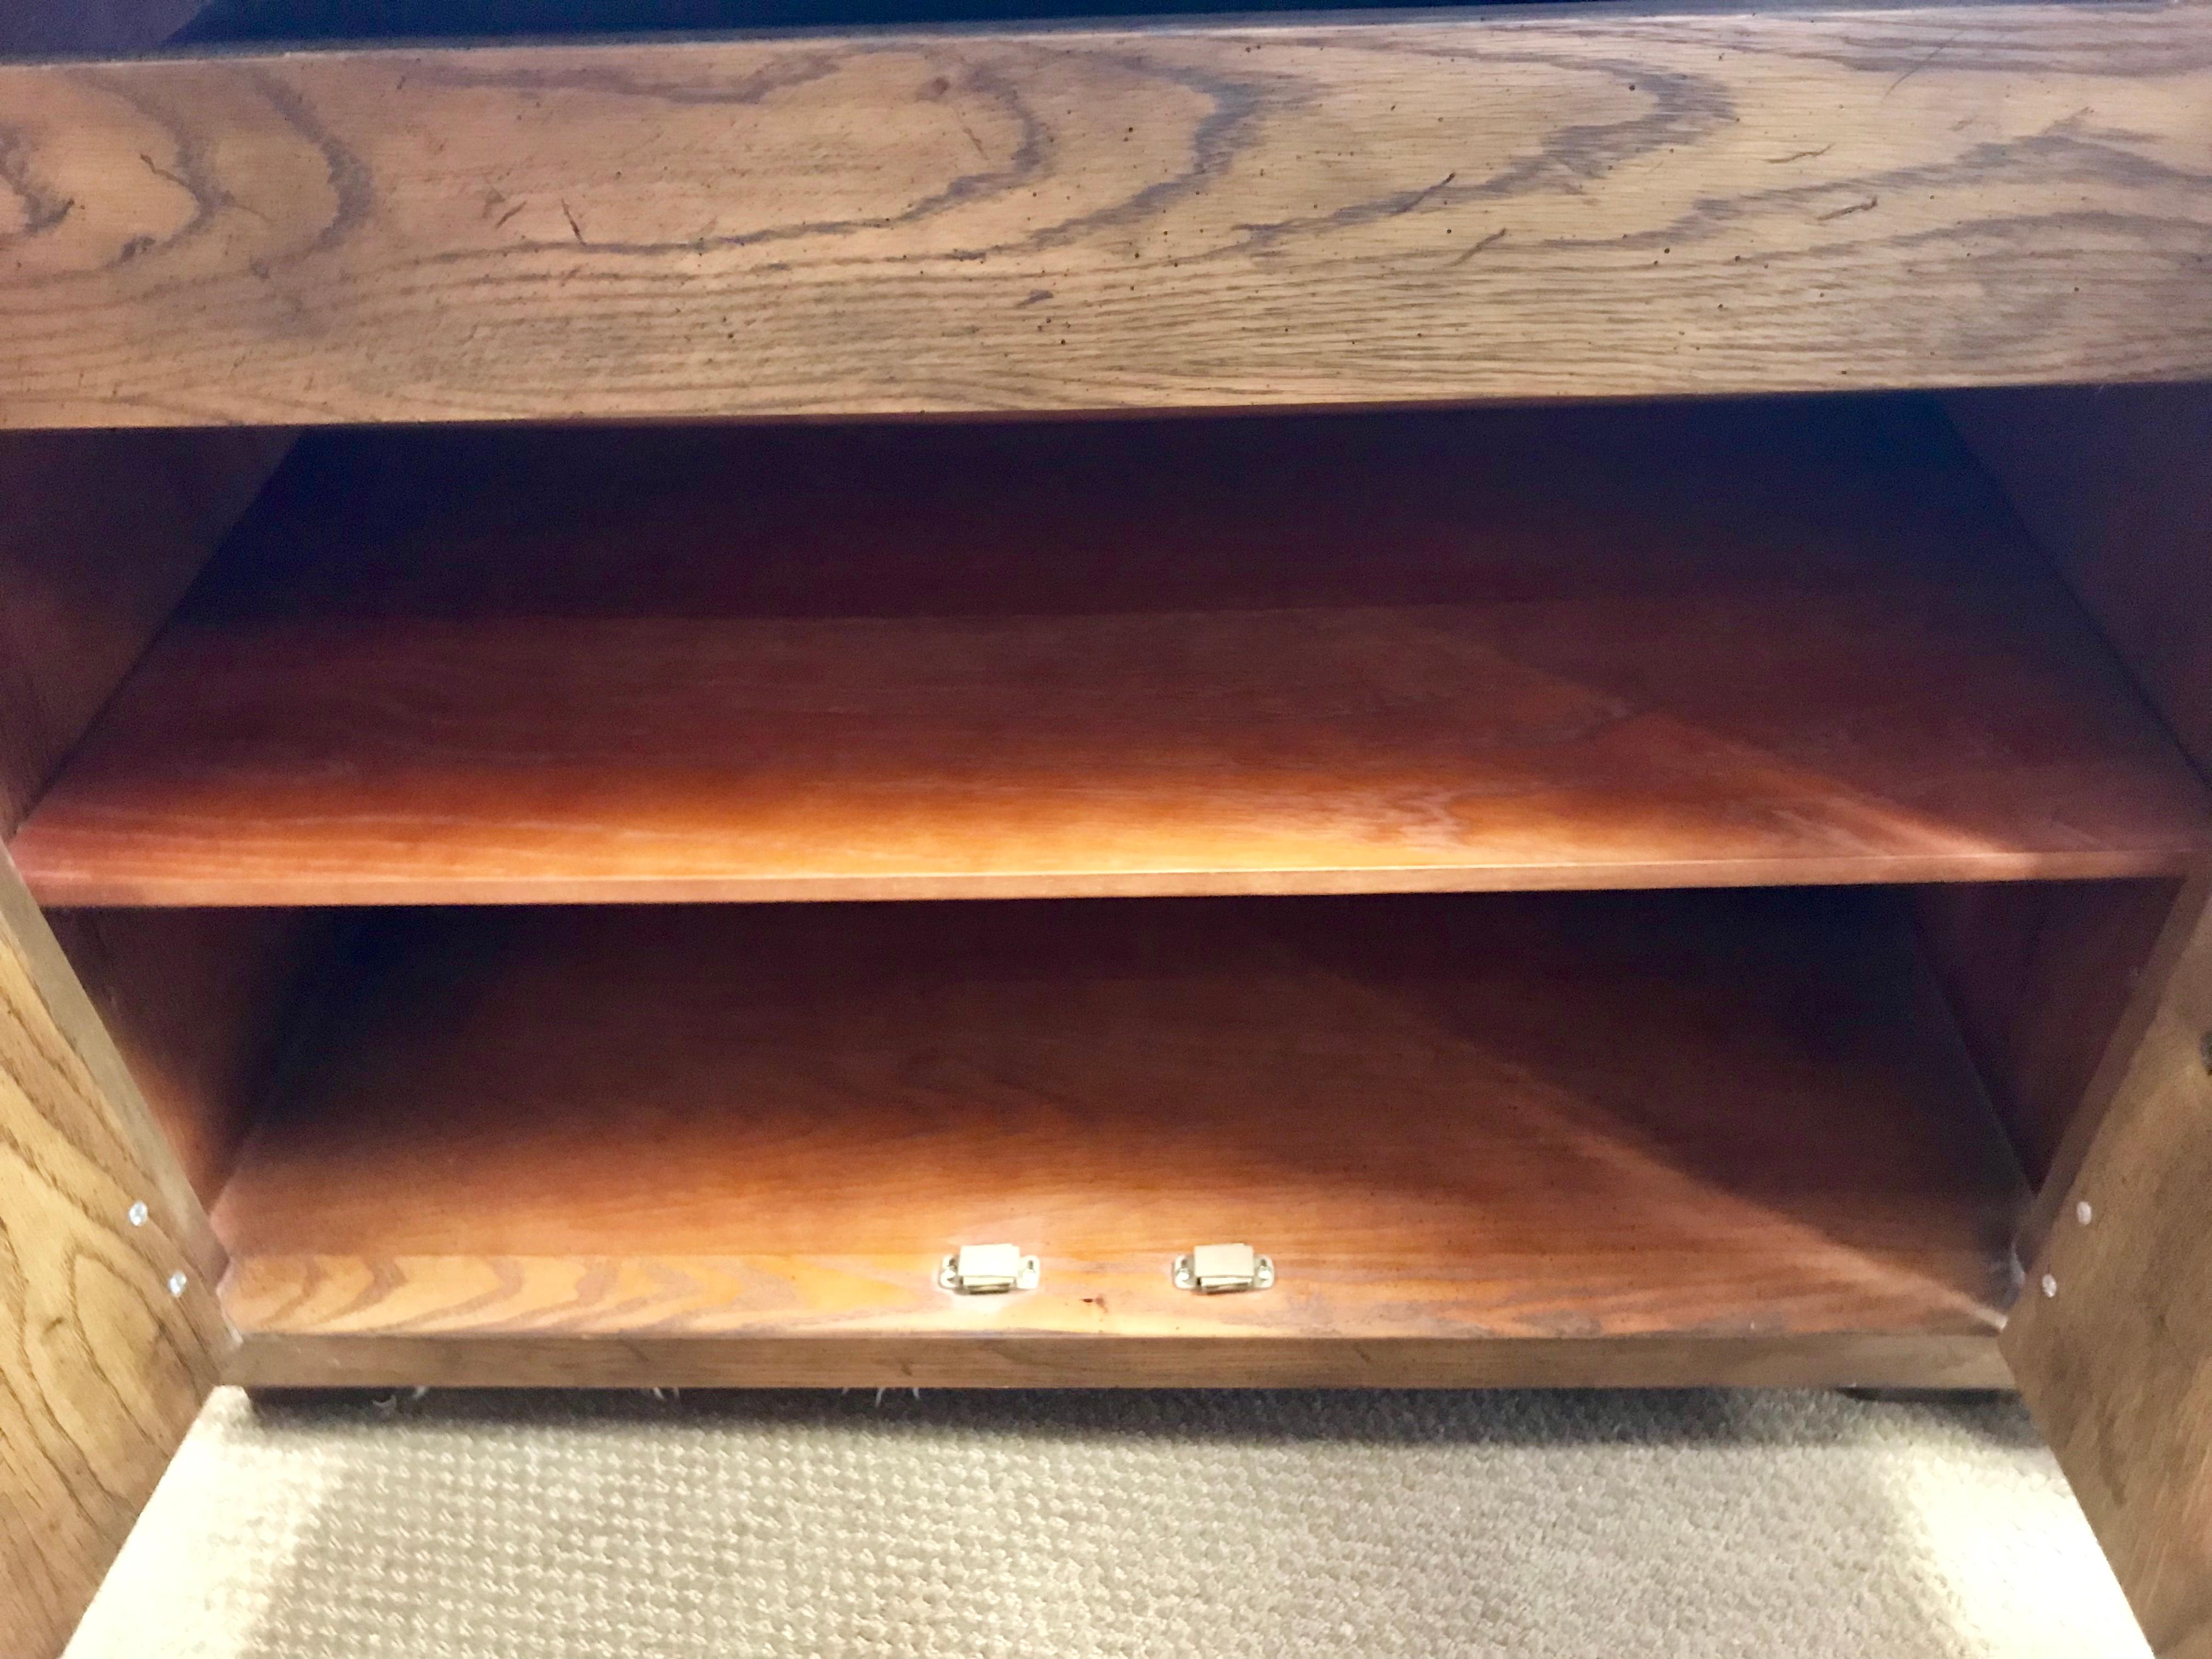 An exceptional pair of Henredon Campaign chests, circa 1970s. Handsome solid brass hardware adds accent. Exceptional craftsmanship and detail. Great as end tables or nightstands. When placed side by side, the pair will form a large credenza. Brass